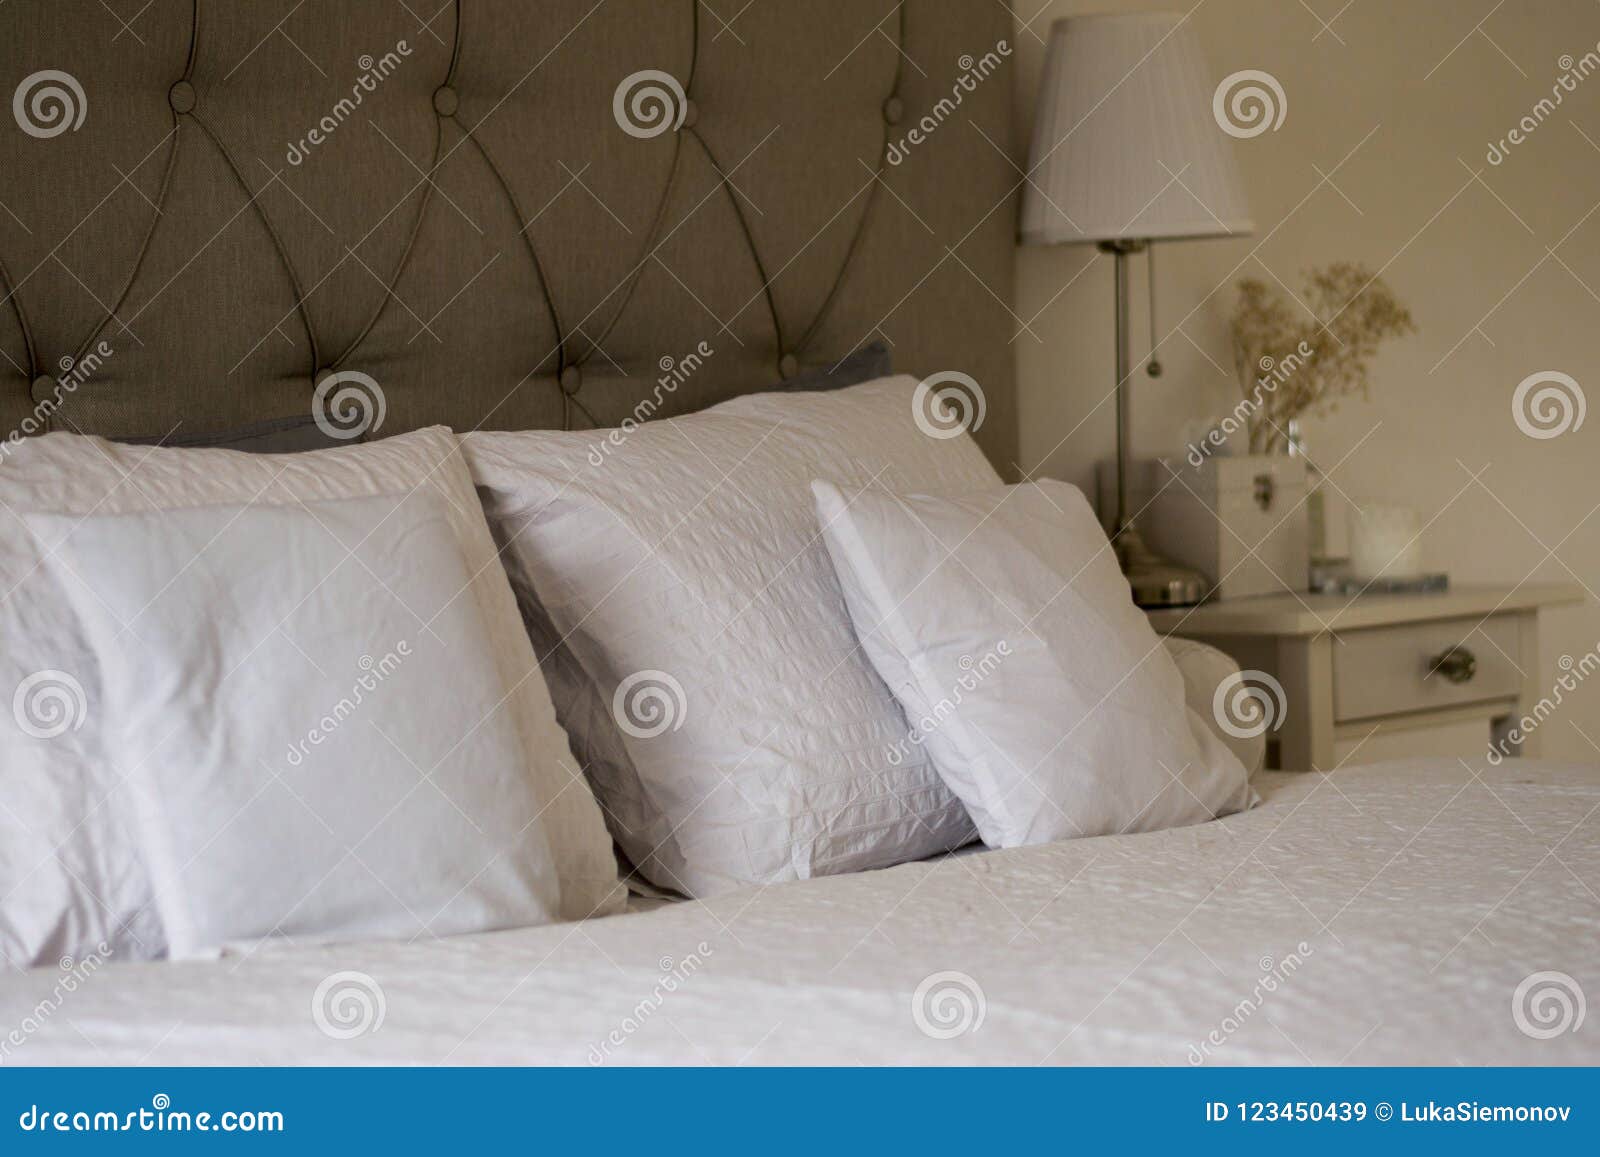 small round bed pillows